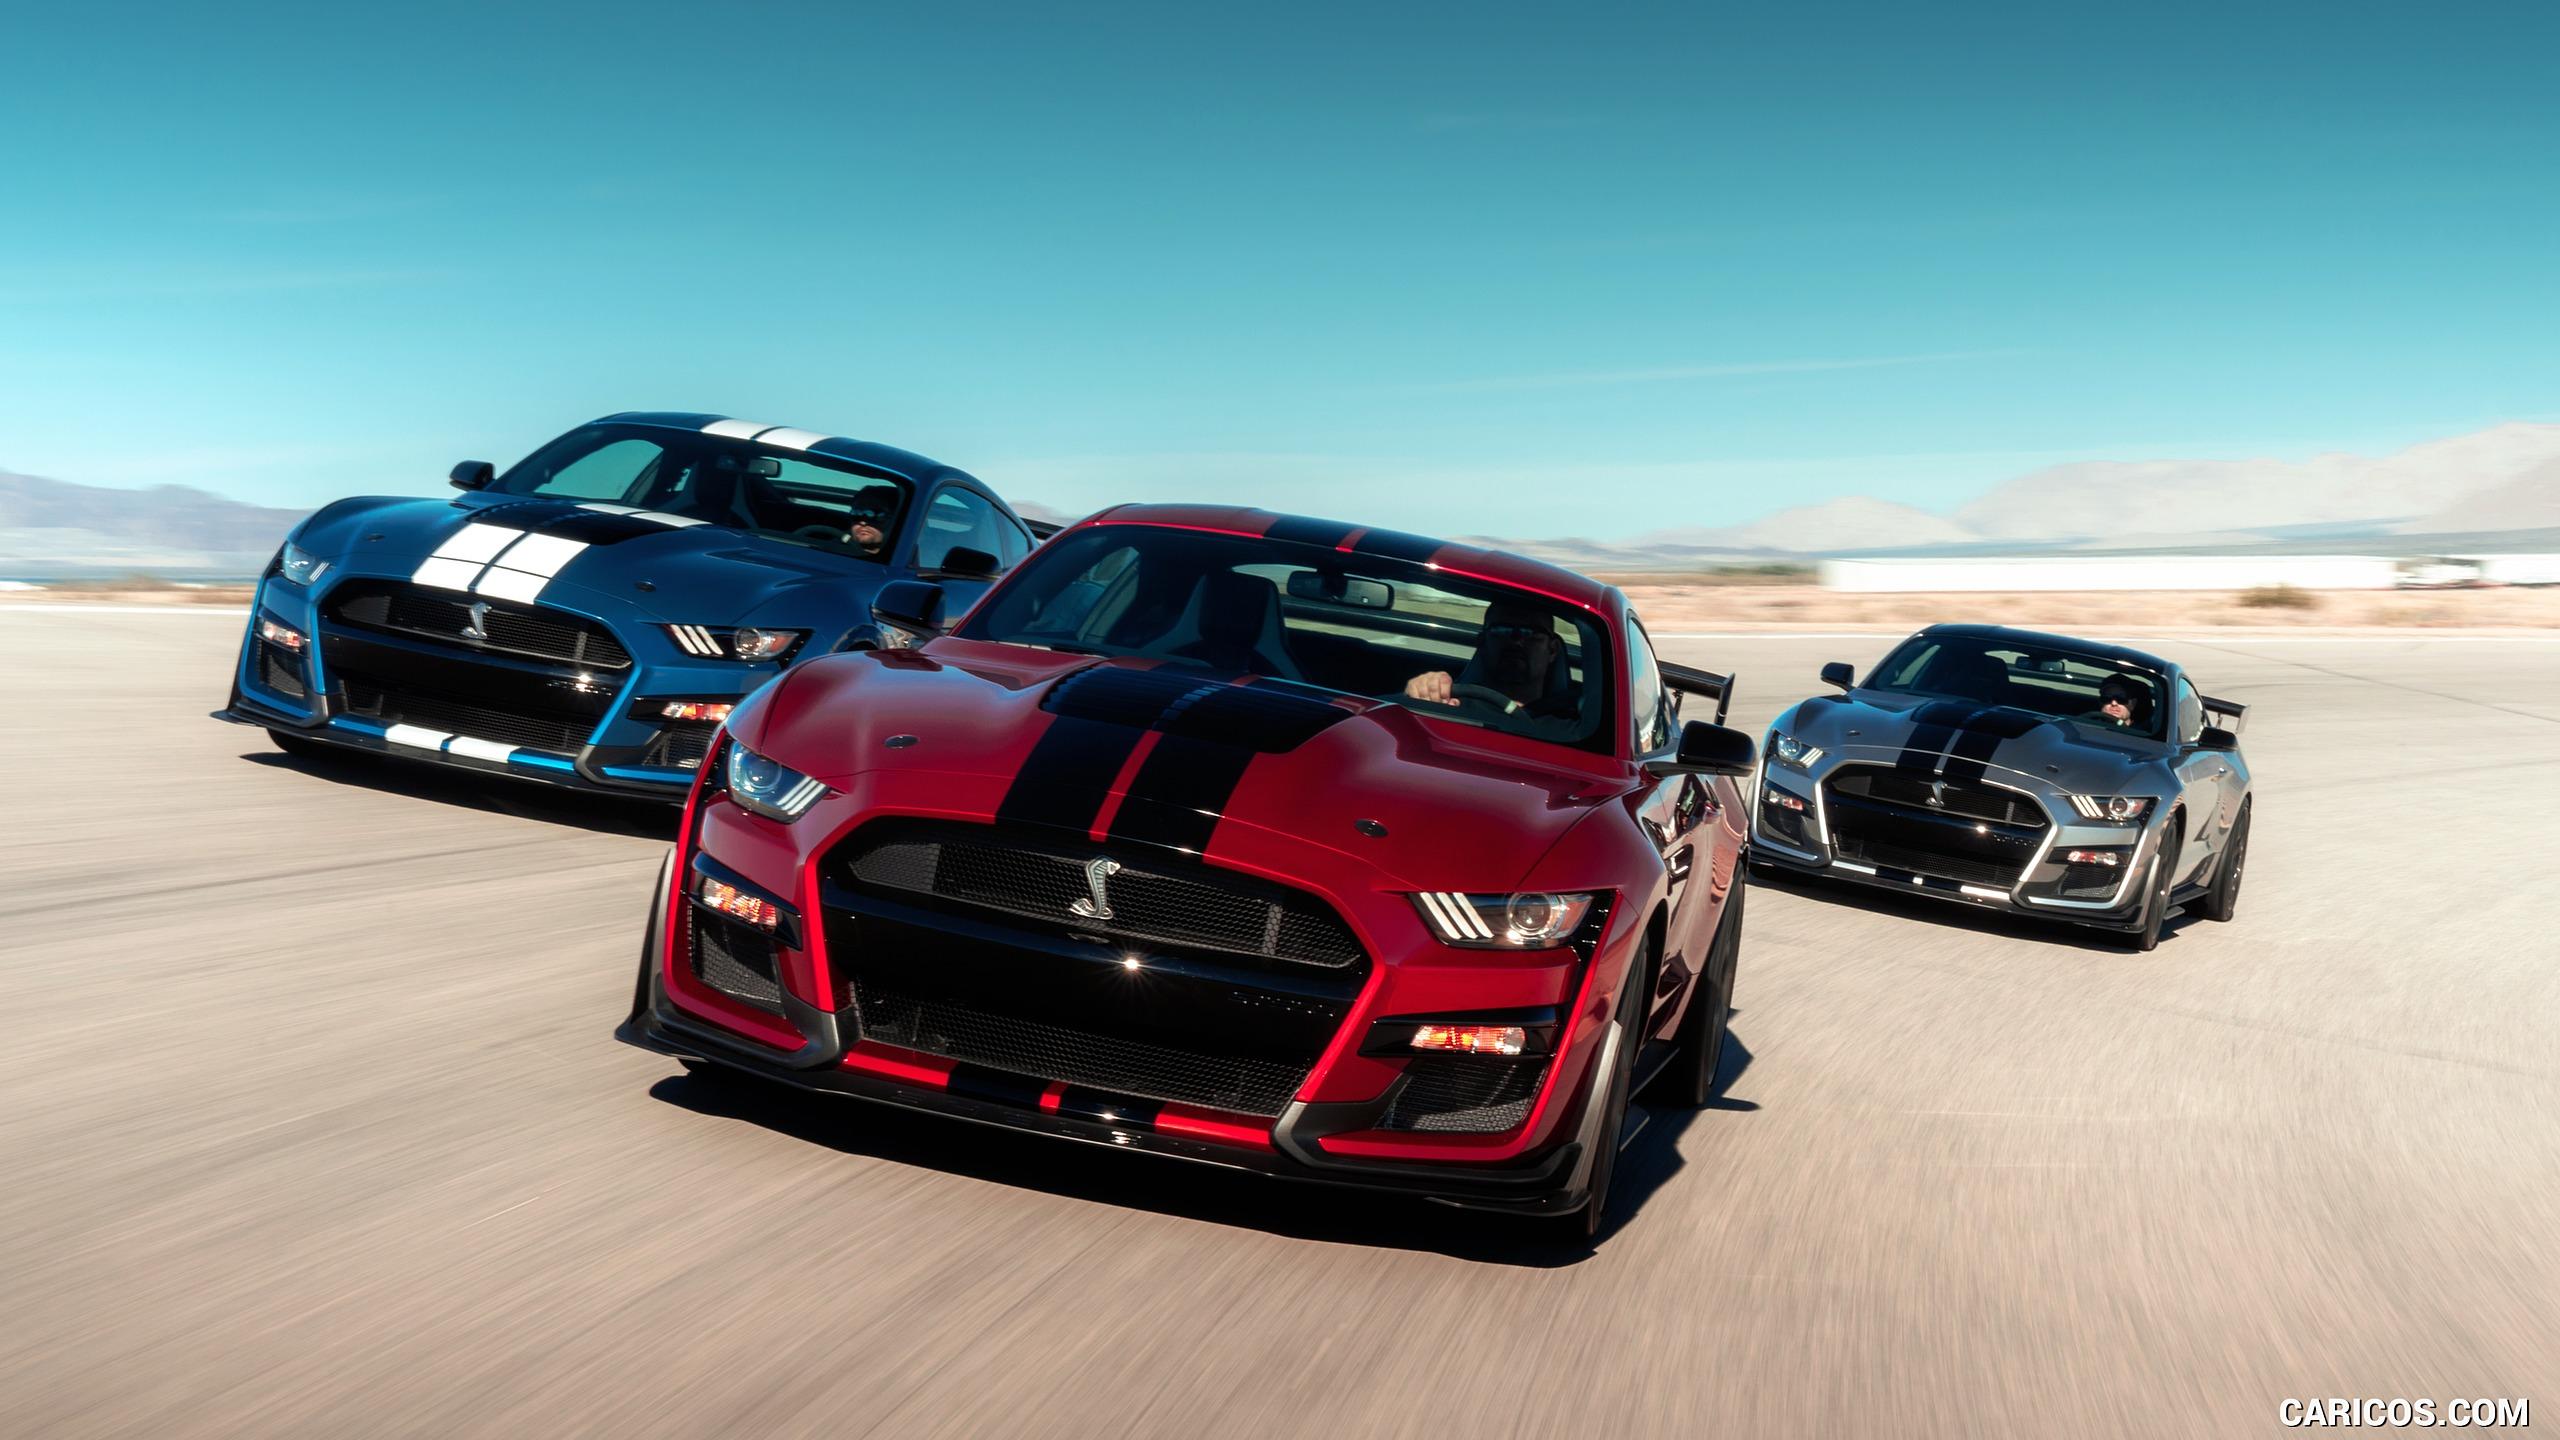 Ford Mustang Shelby GT500 Wallpaper 32 image